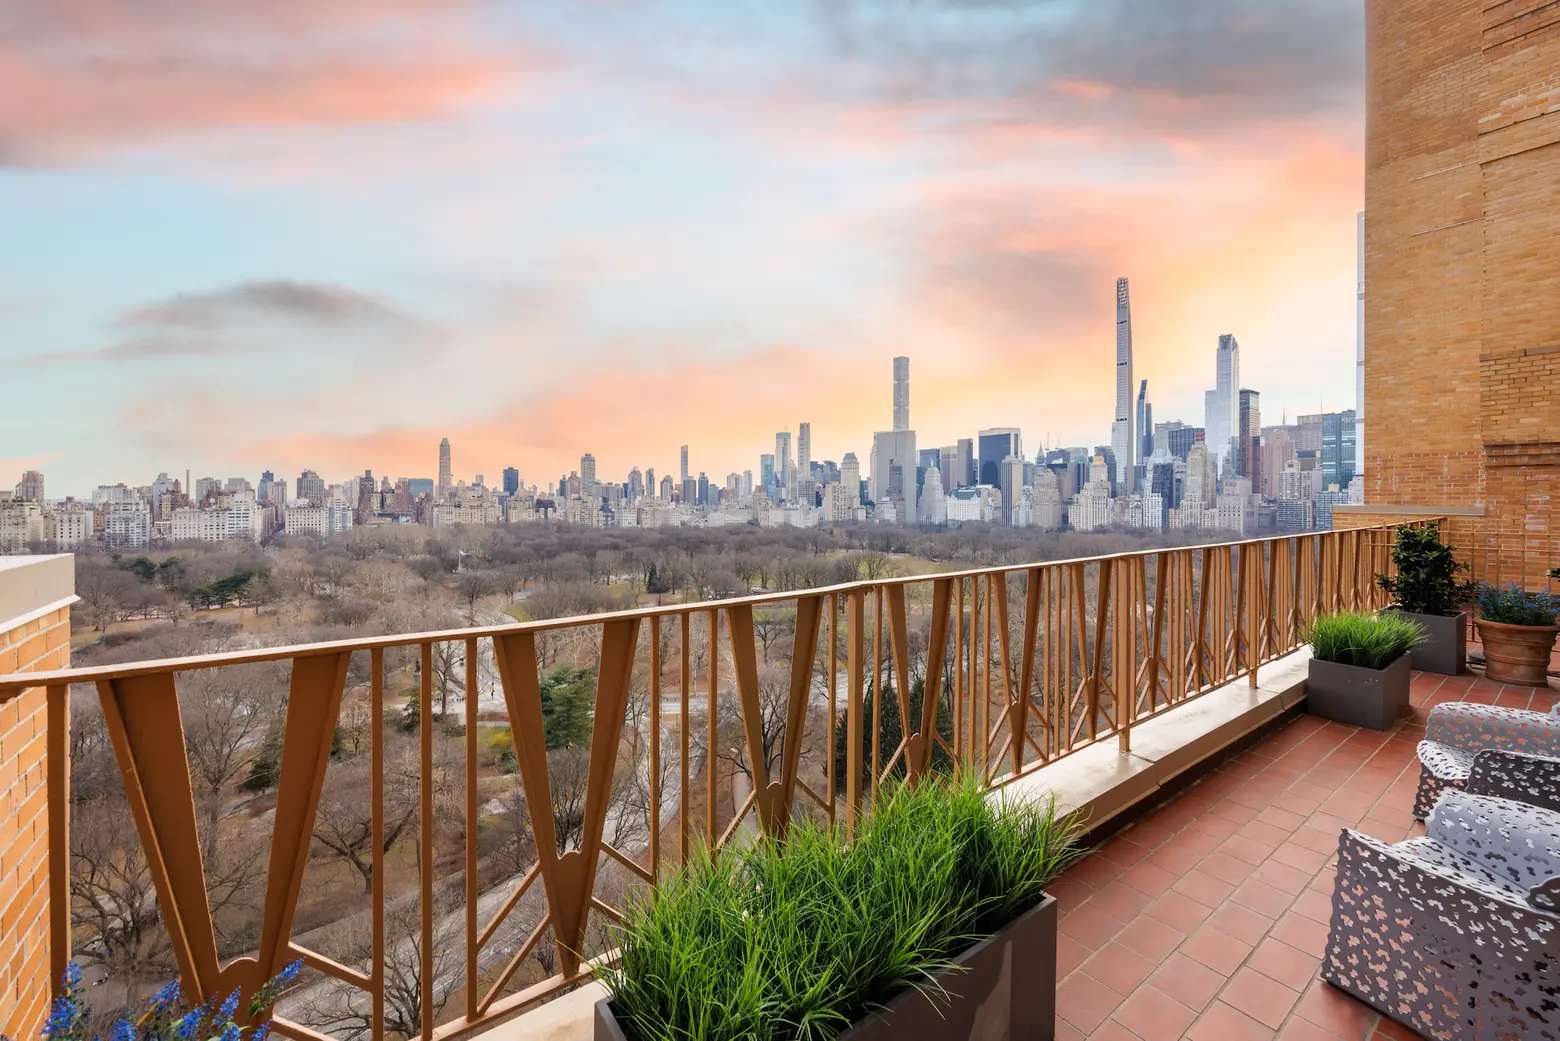 $27.5M palatial penthouse has a front-row view of Central Park and beyond